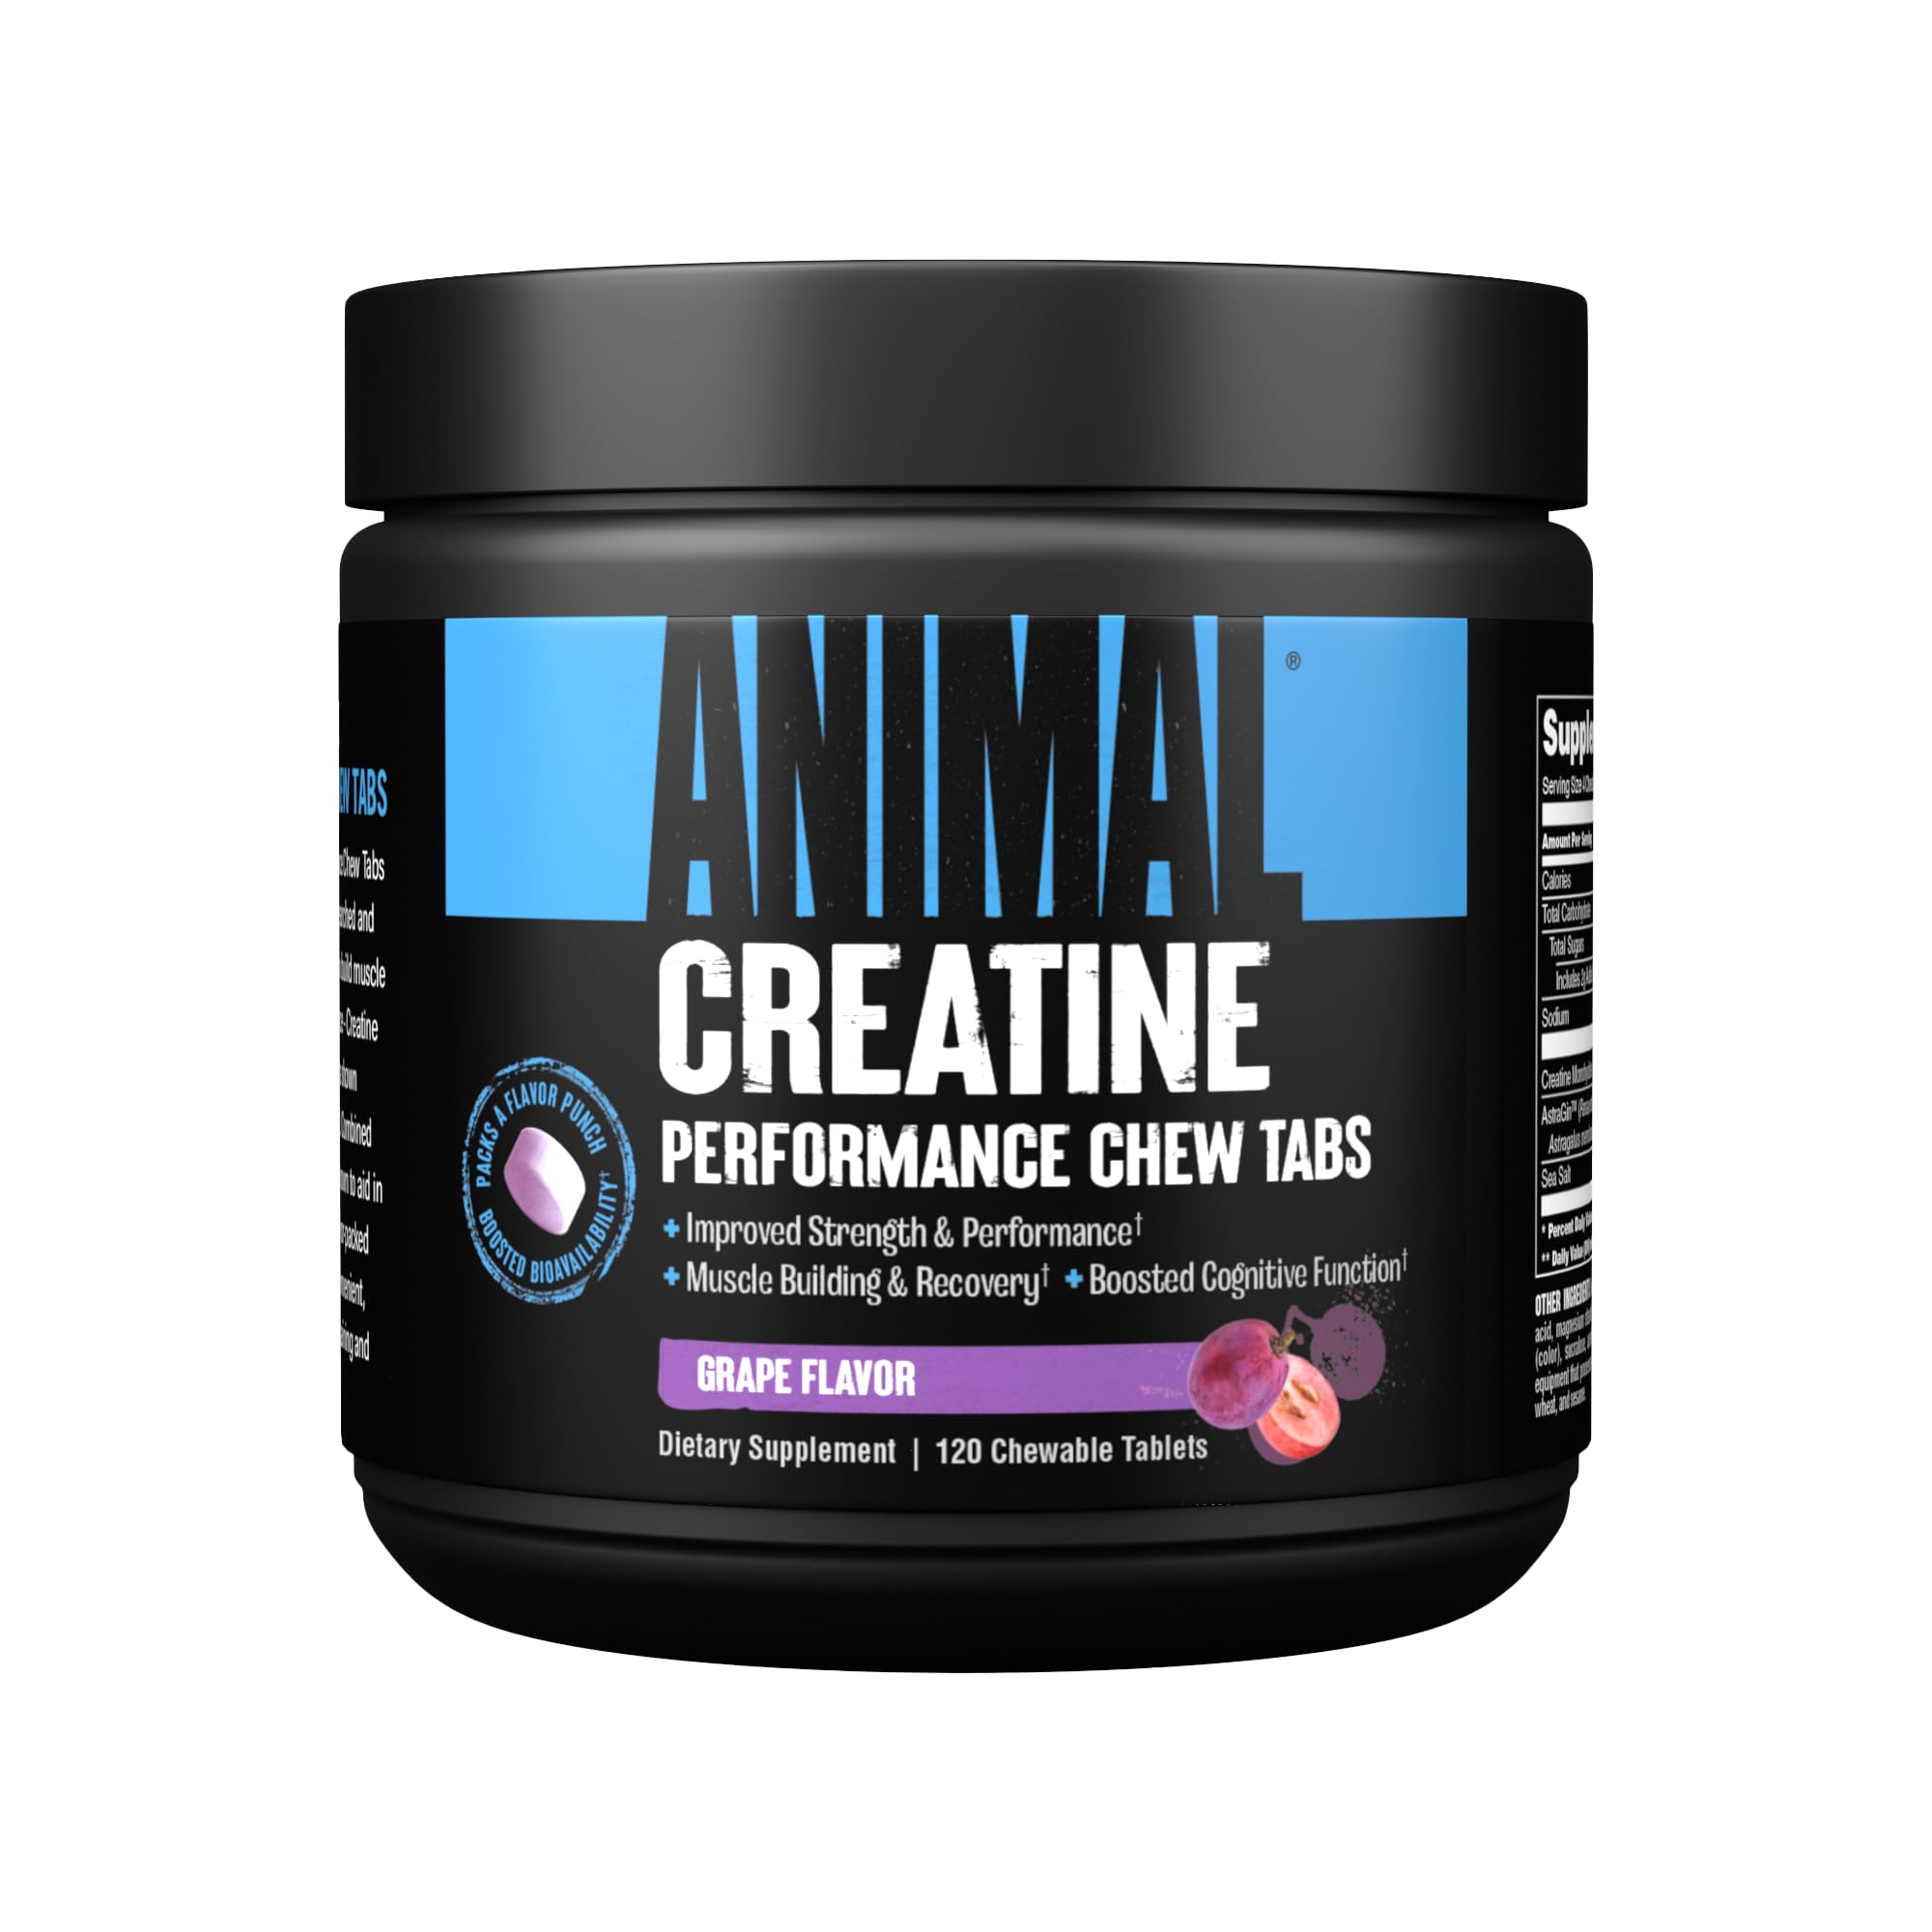 Animal Creatine Chews Tablets - Enhanced Creatine Monohydrate with AstraGin to Improve Absorption & Juiced Aminos - 6g BCAA/EAA Matrix Plus 4g Amino Acid Blend for Recovery and Improved Performance